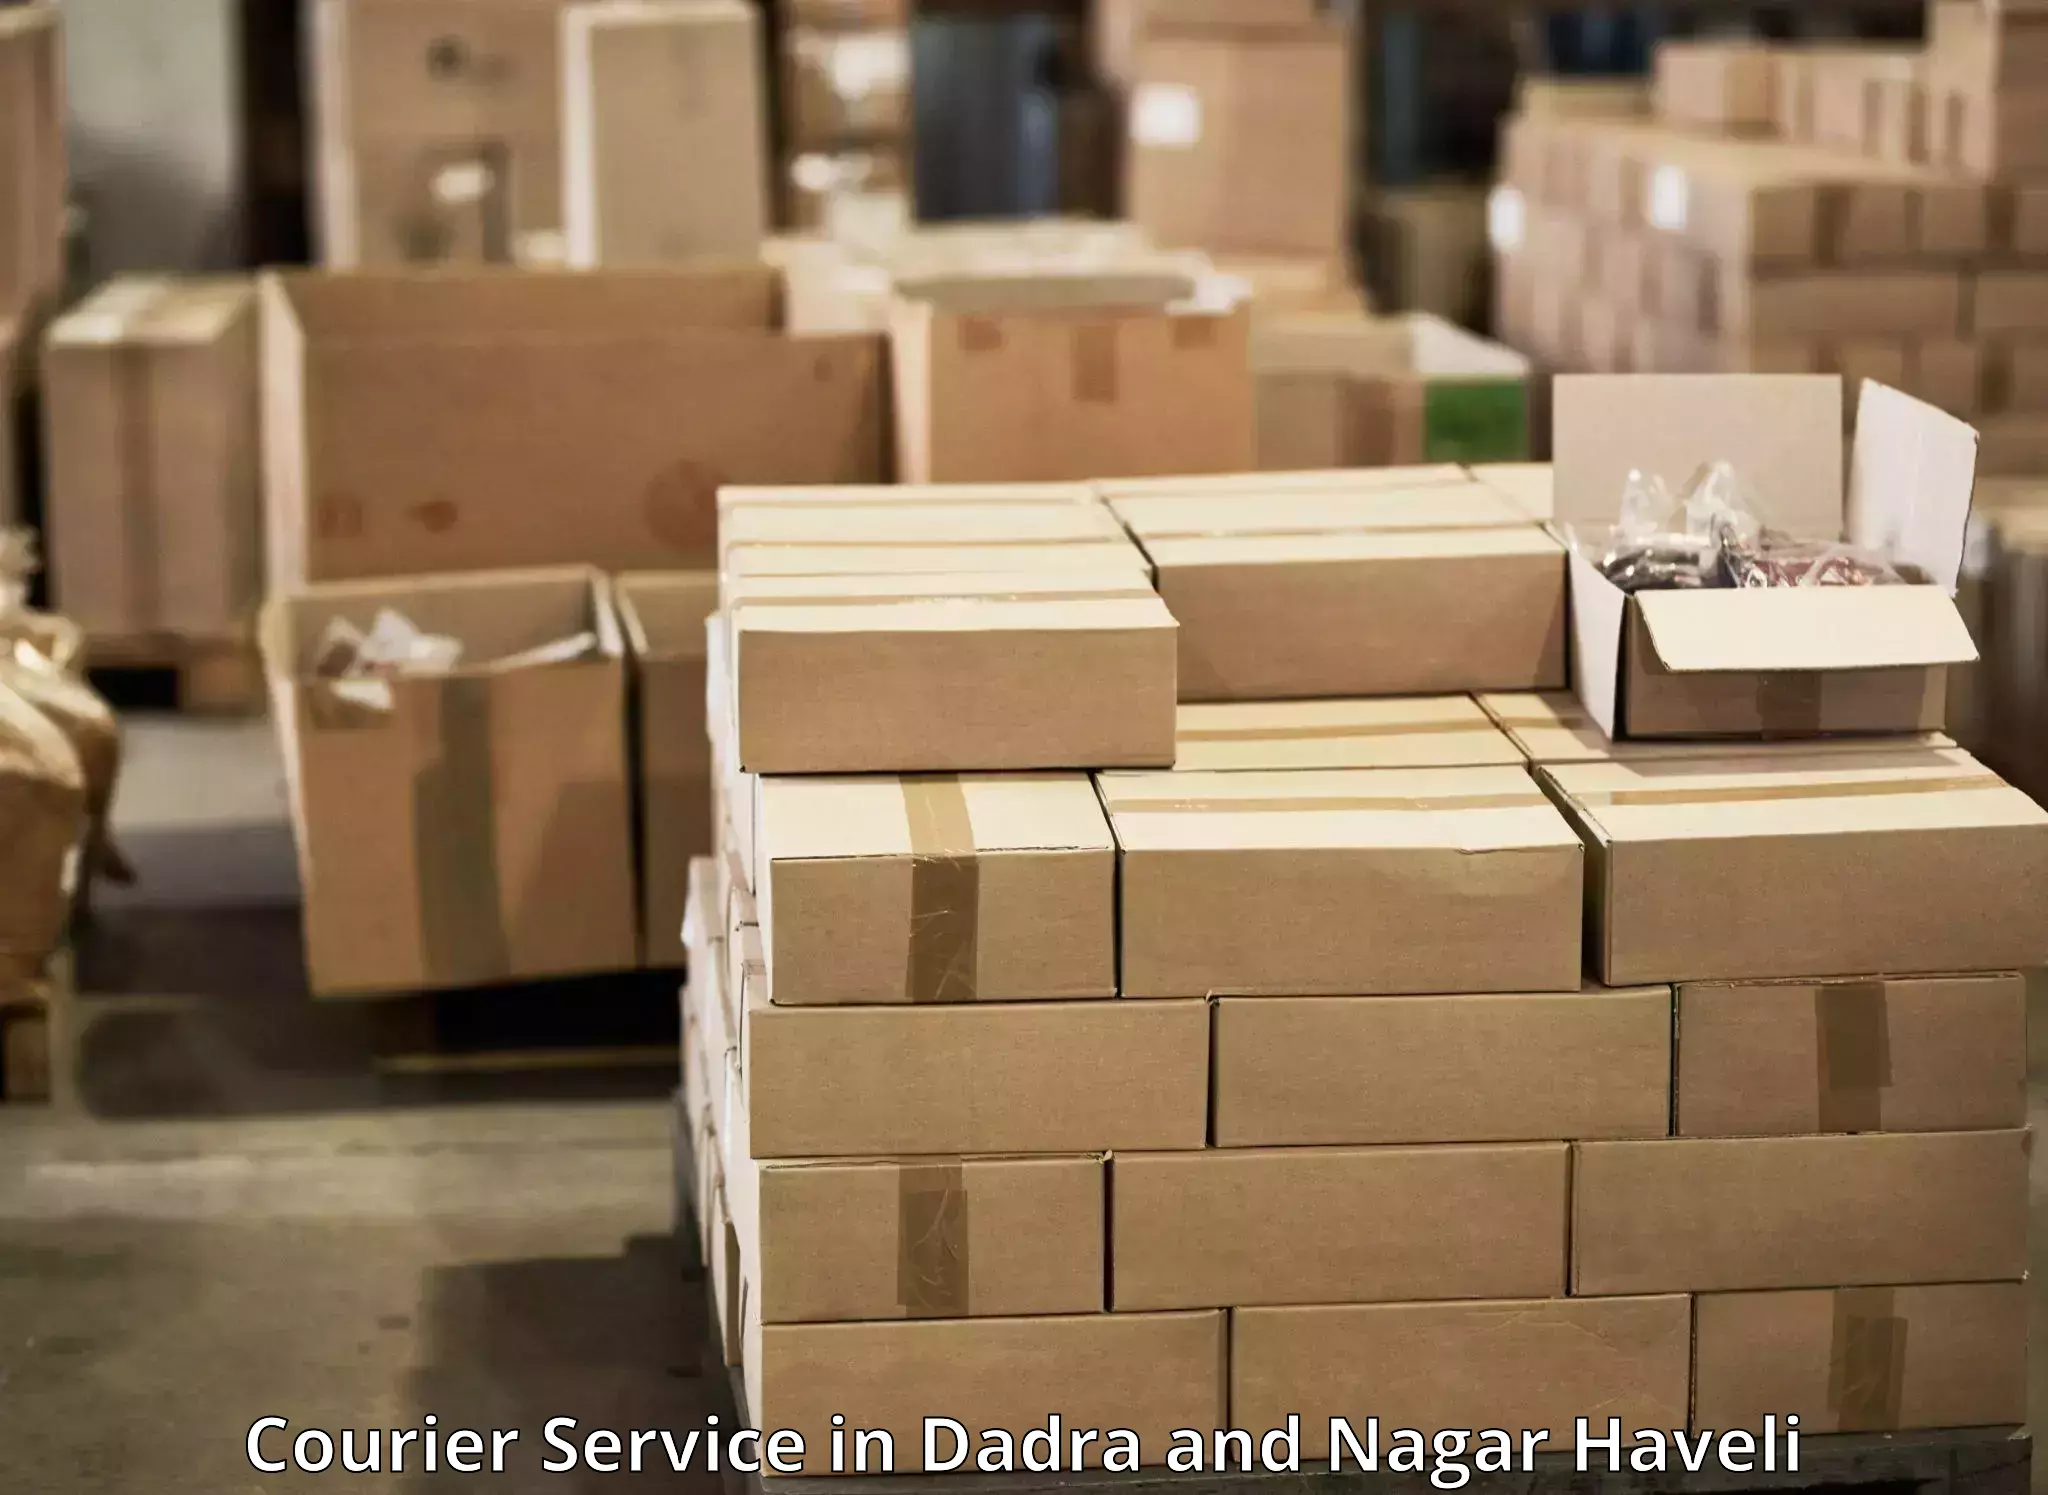 Tailored shipping plans in Dadra and Nagar Haveli